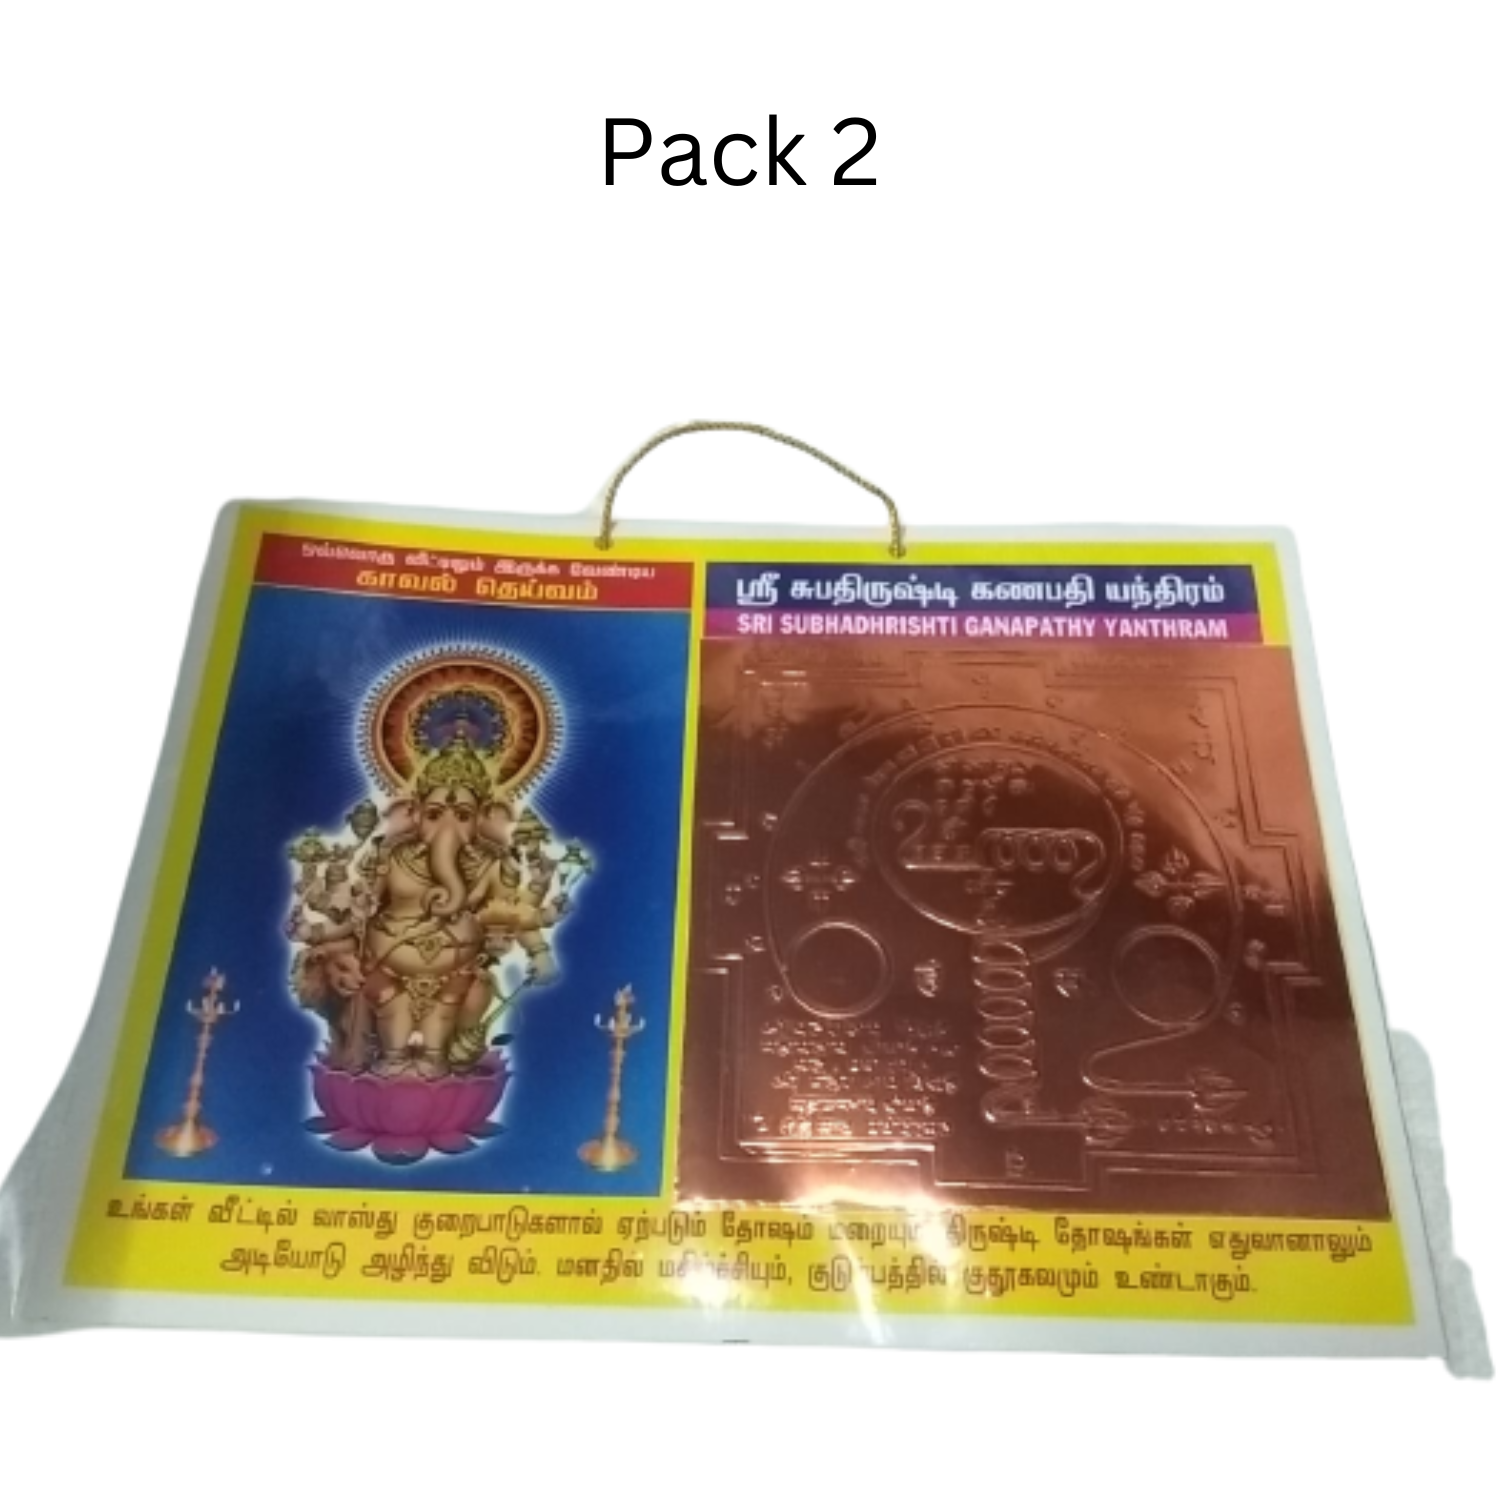 Sri Subhadhrishti Ganapathy Yantram with photo Laminations Wall Hanging Fram Total 2 pack  - Gold Plated Copper Big Size,12x9in)